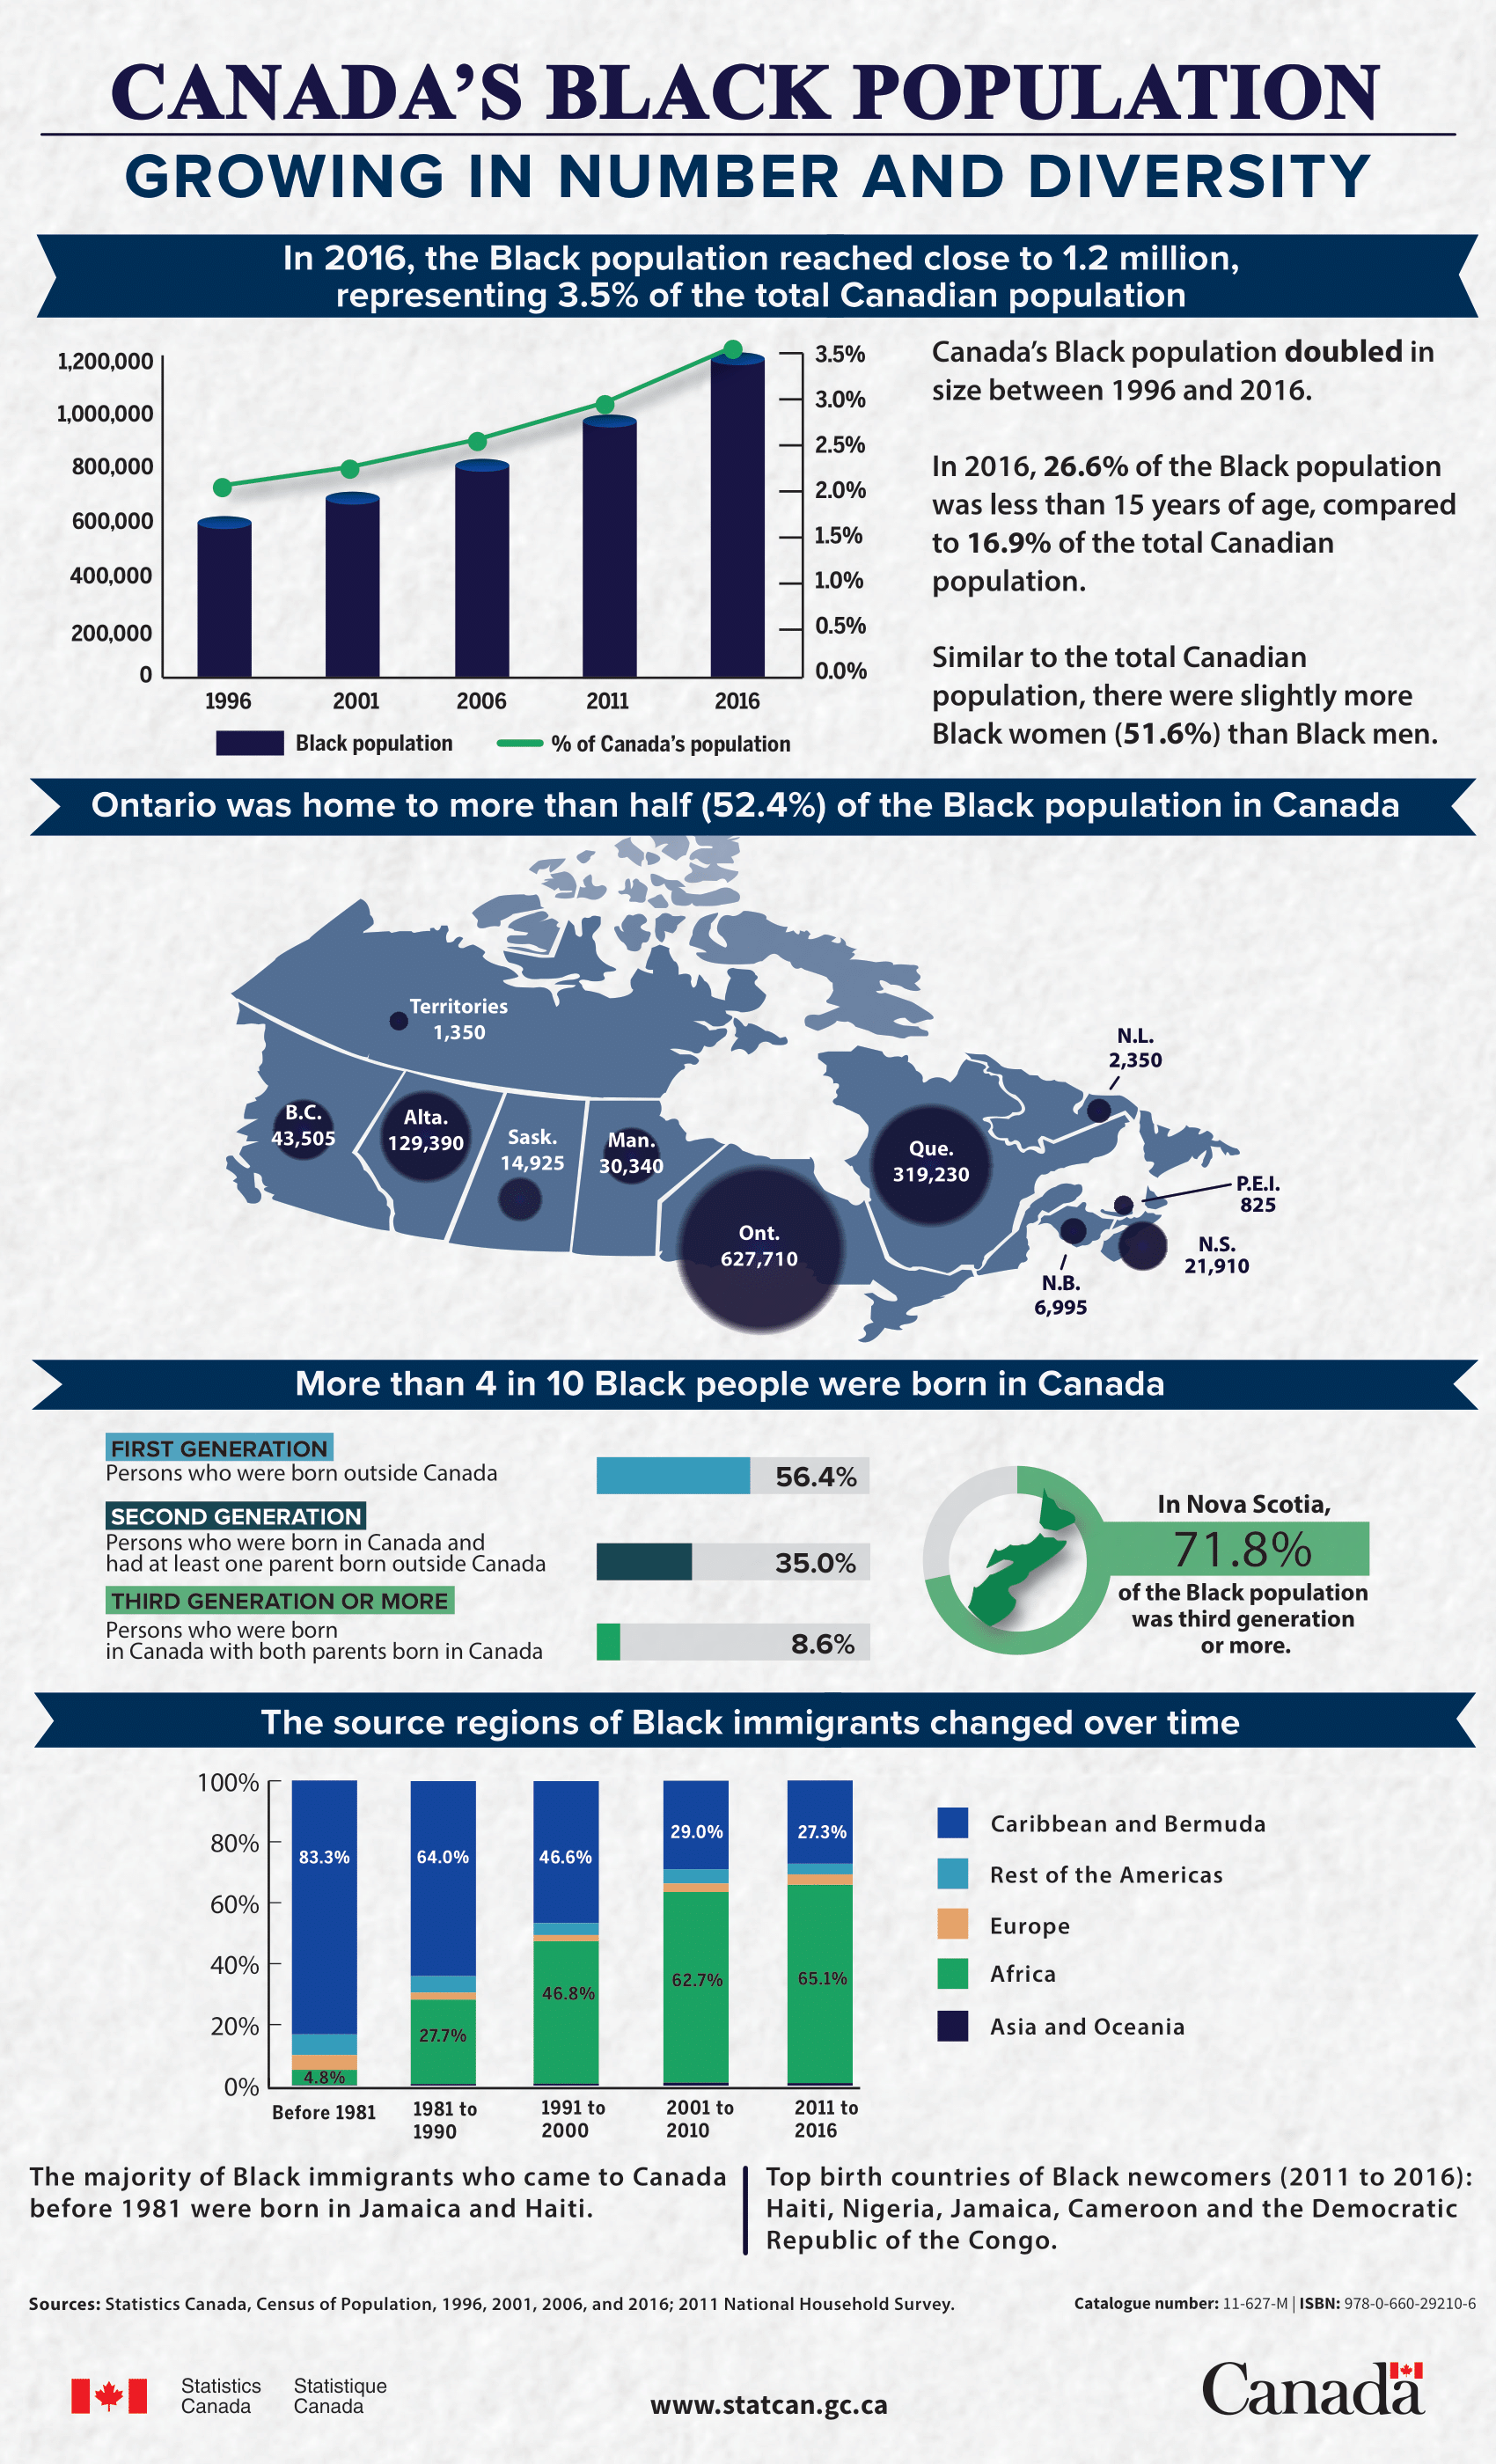 infographic image can be accessed in PDF format by clicking on image link:https://www150.statcan.gc.ca/n1/pub/11-627-m/11-627-m2019006-eng.pdf